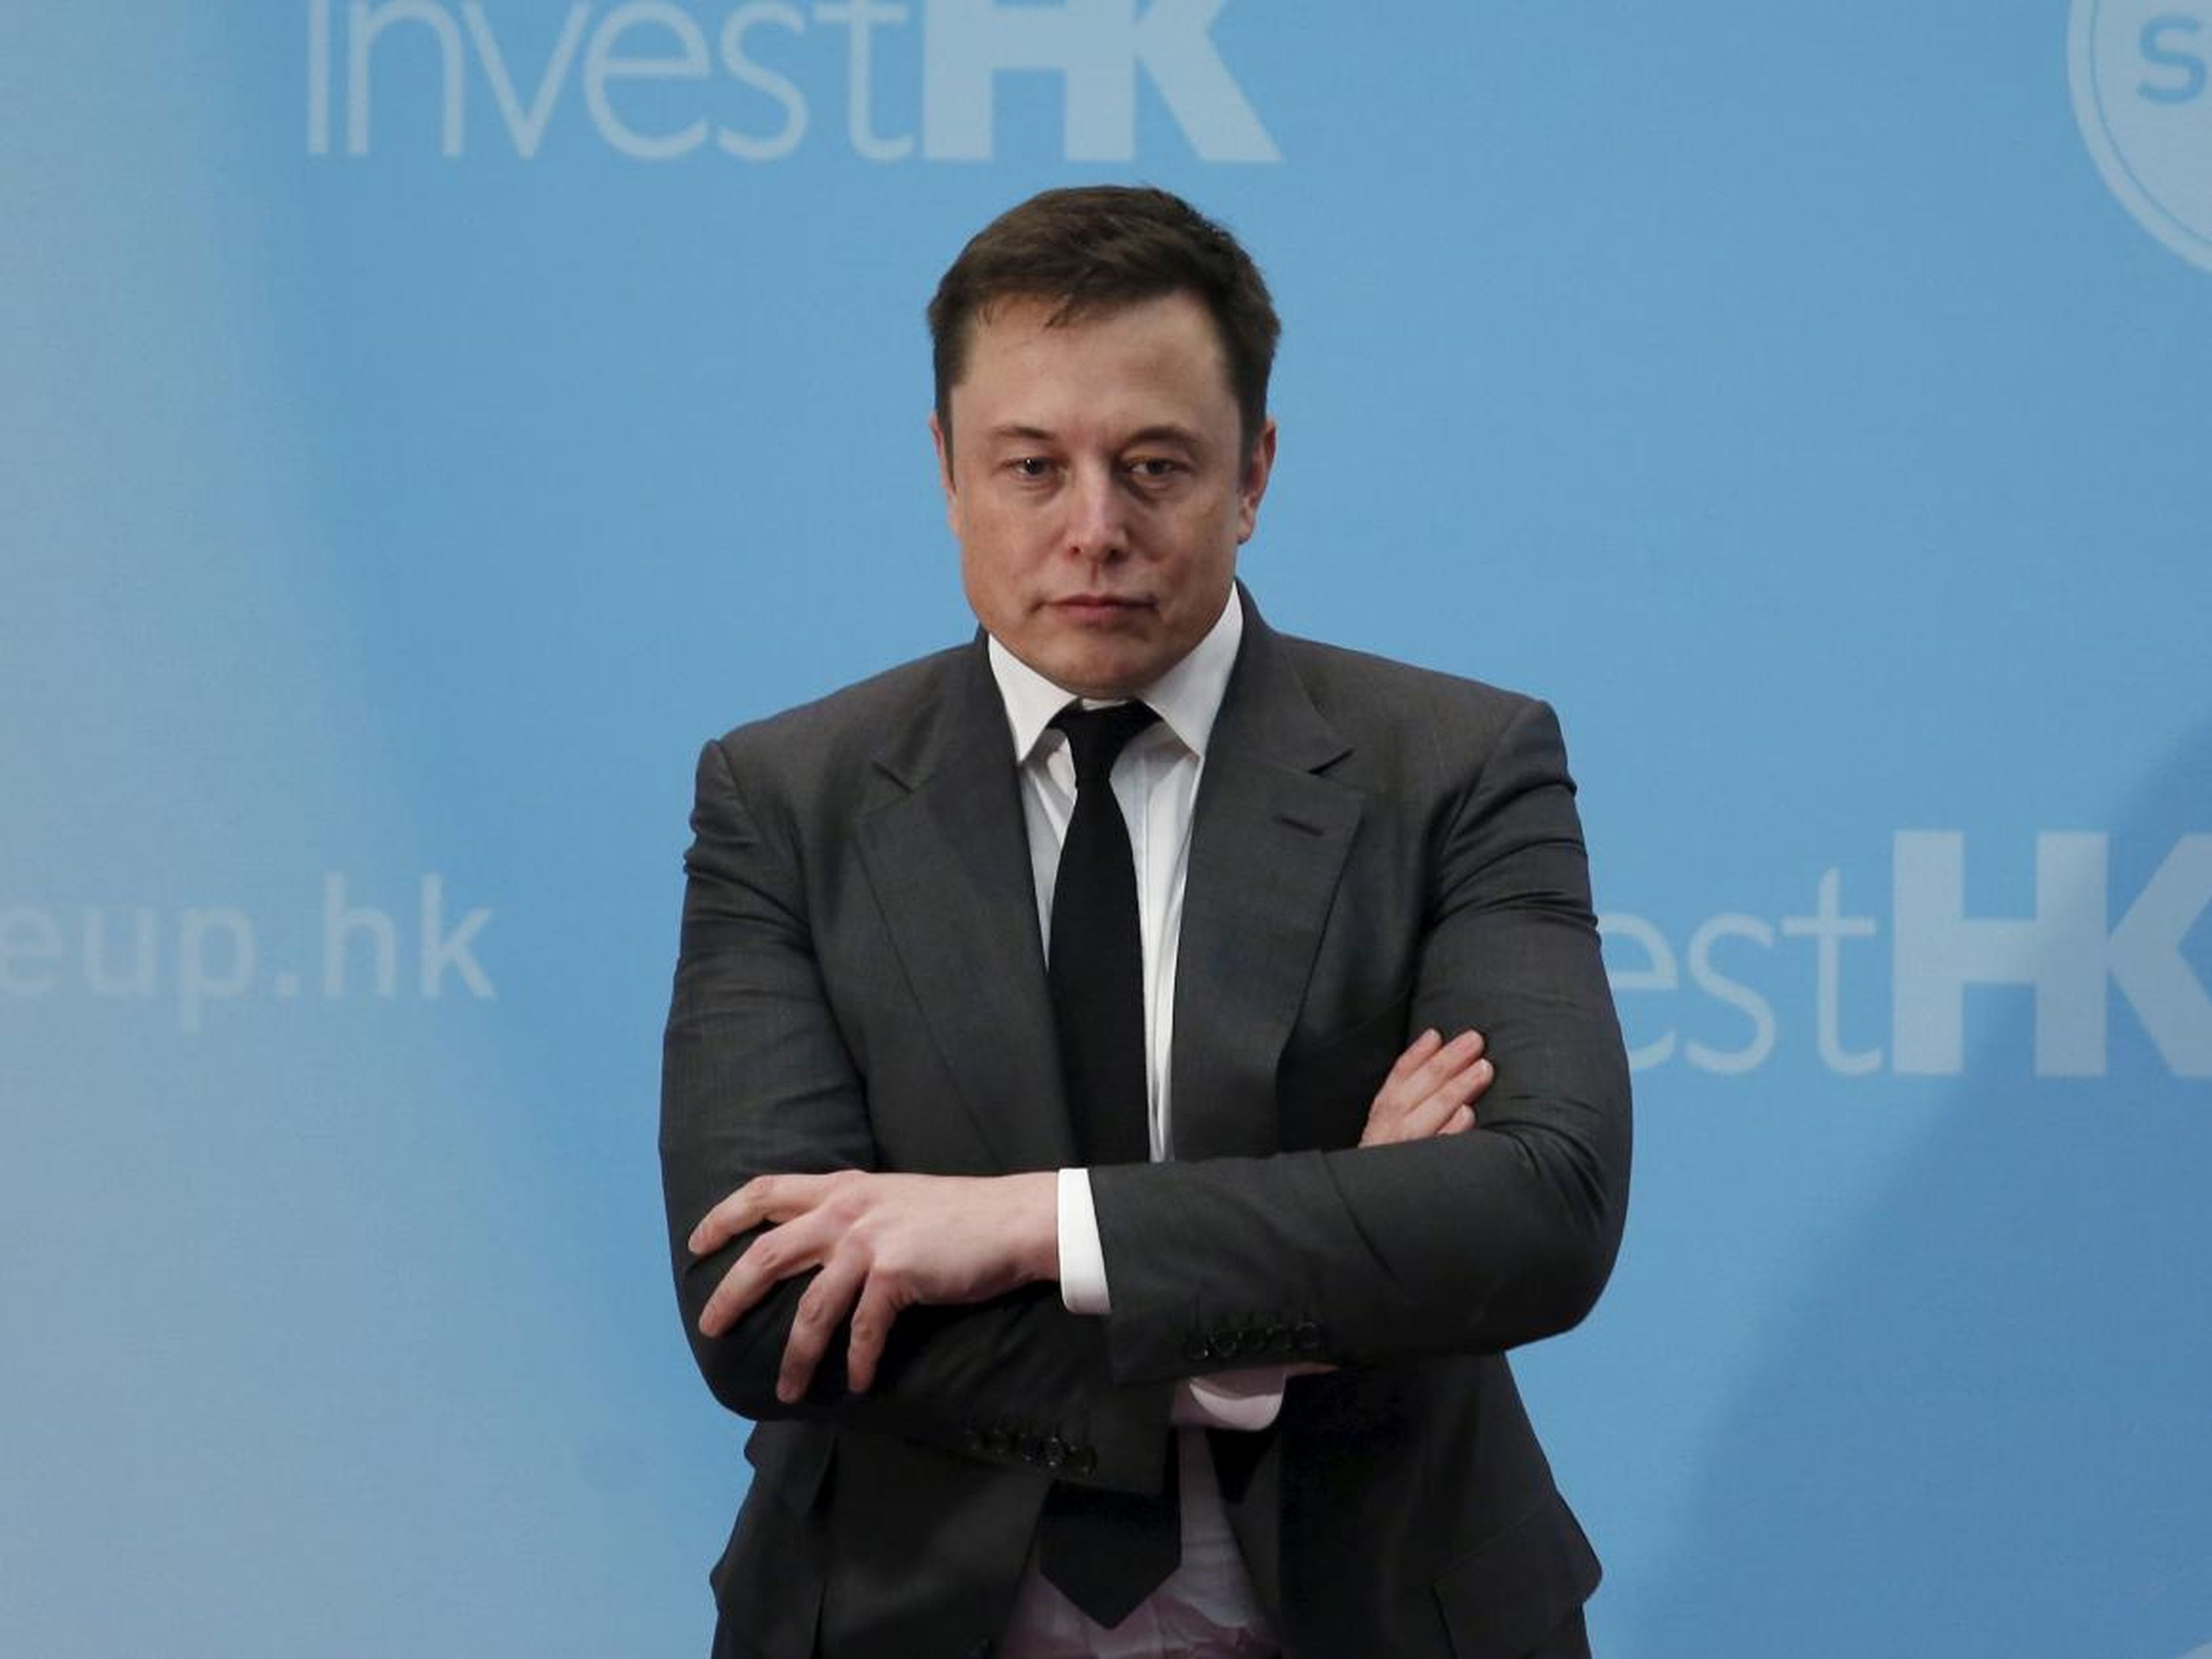 But between SpaceX, Tesla, and SolarCity, Musk very nearly went broke.